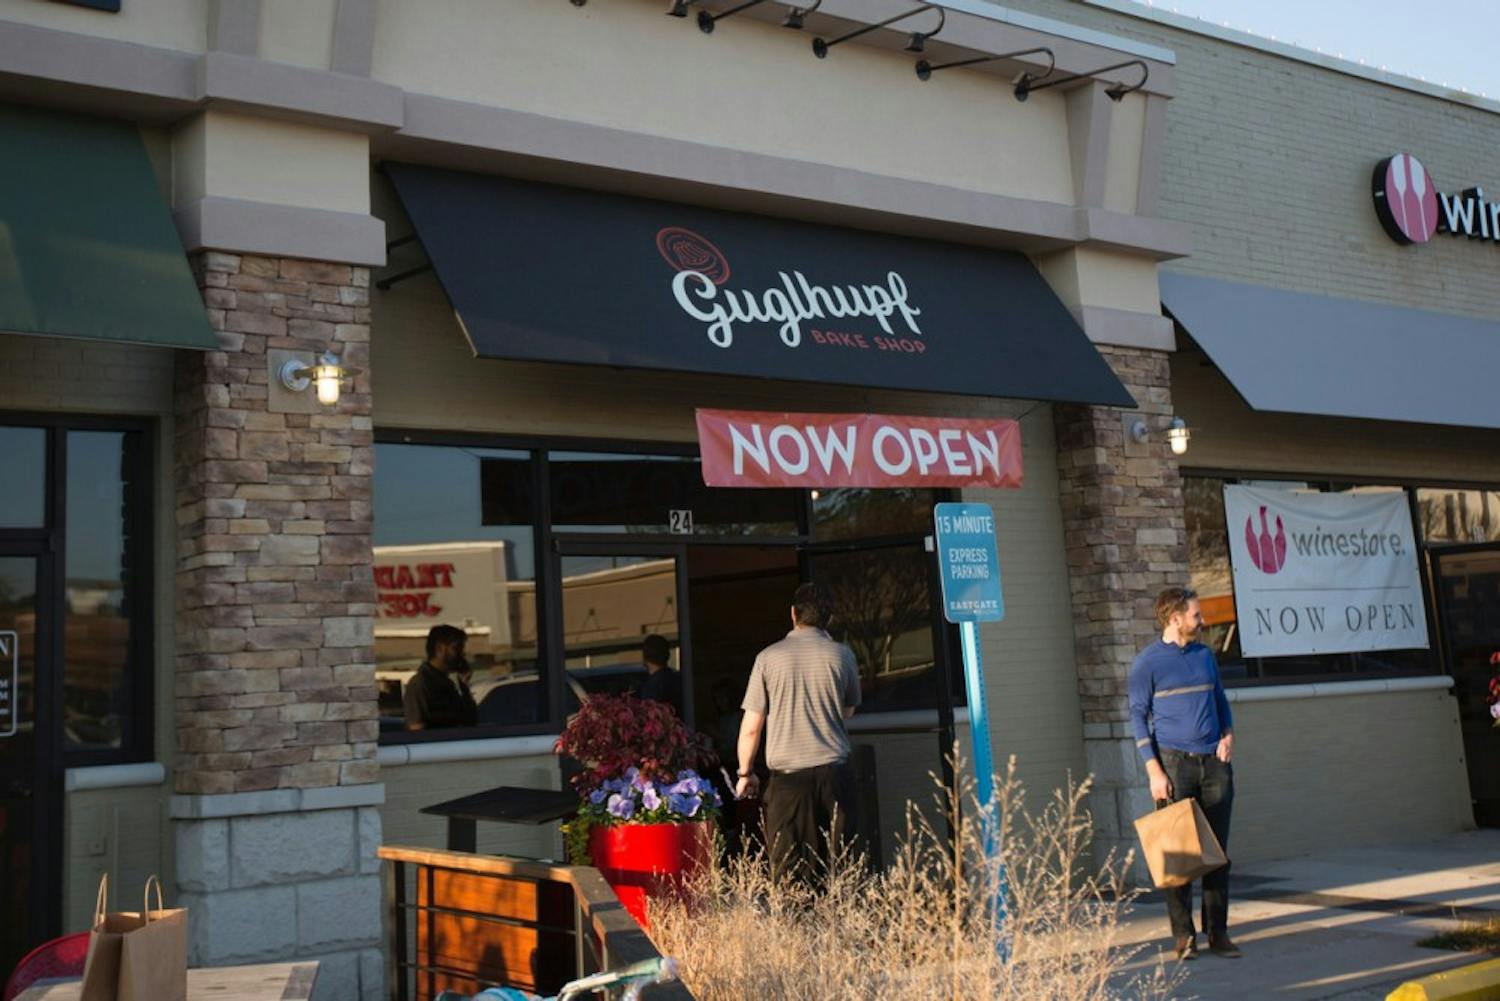 Customers walk in and out of the newest bakery in the Eastgate shopping center, Guglhupf, on Friday, Dec. 1.&nbsp;